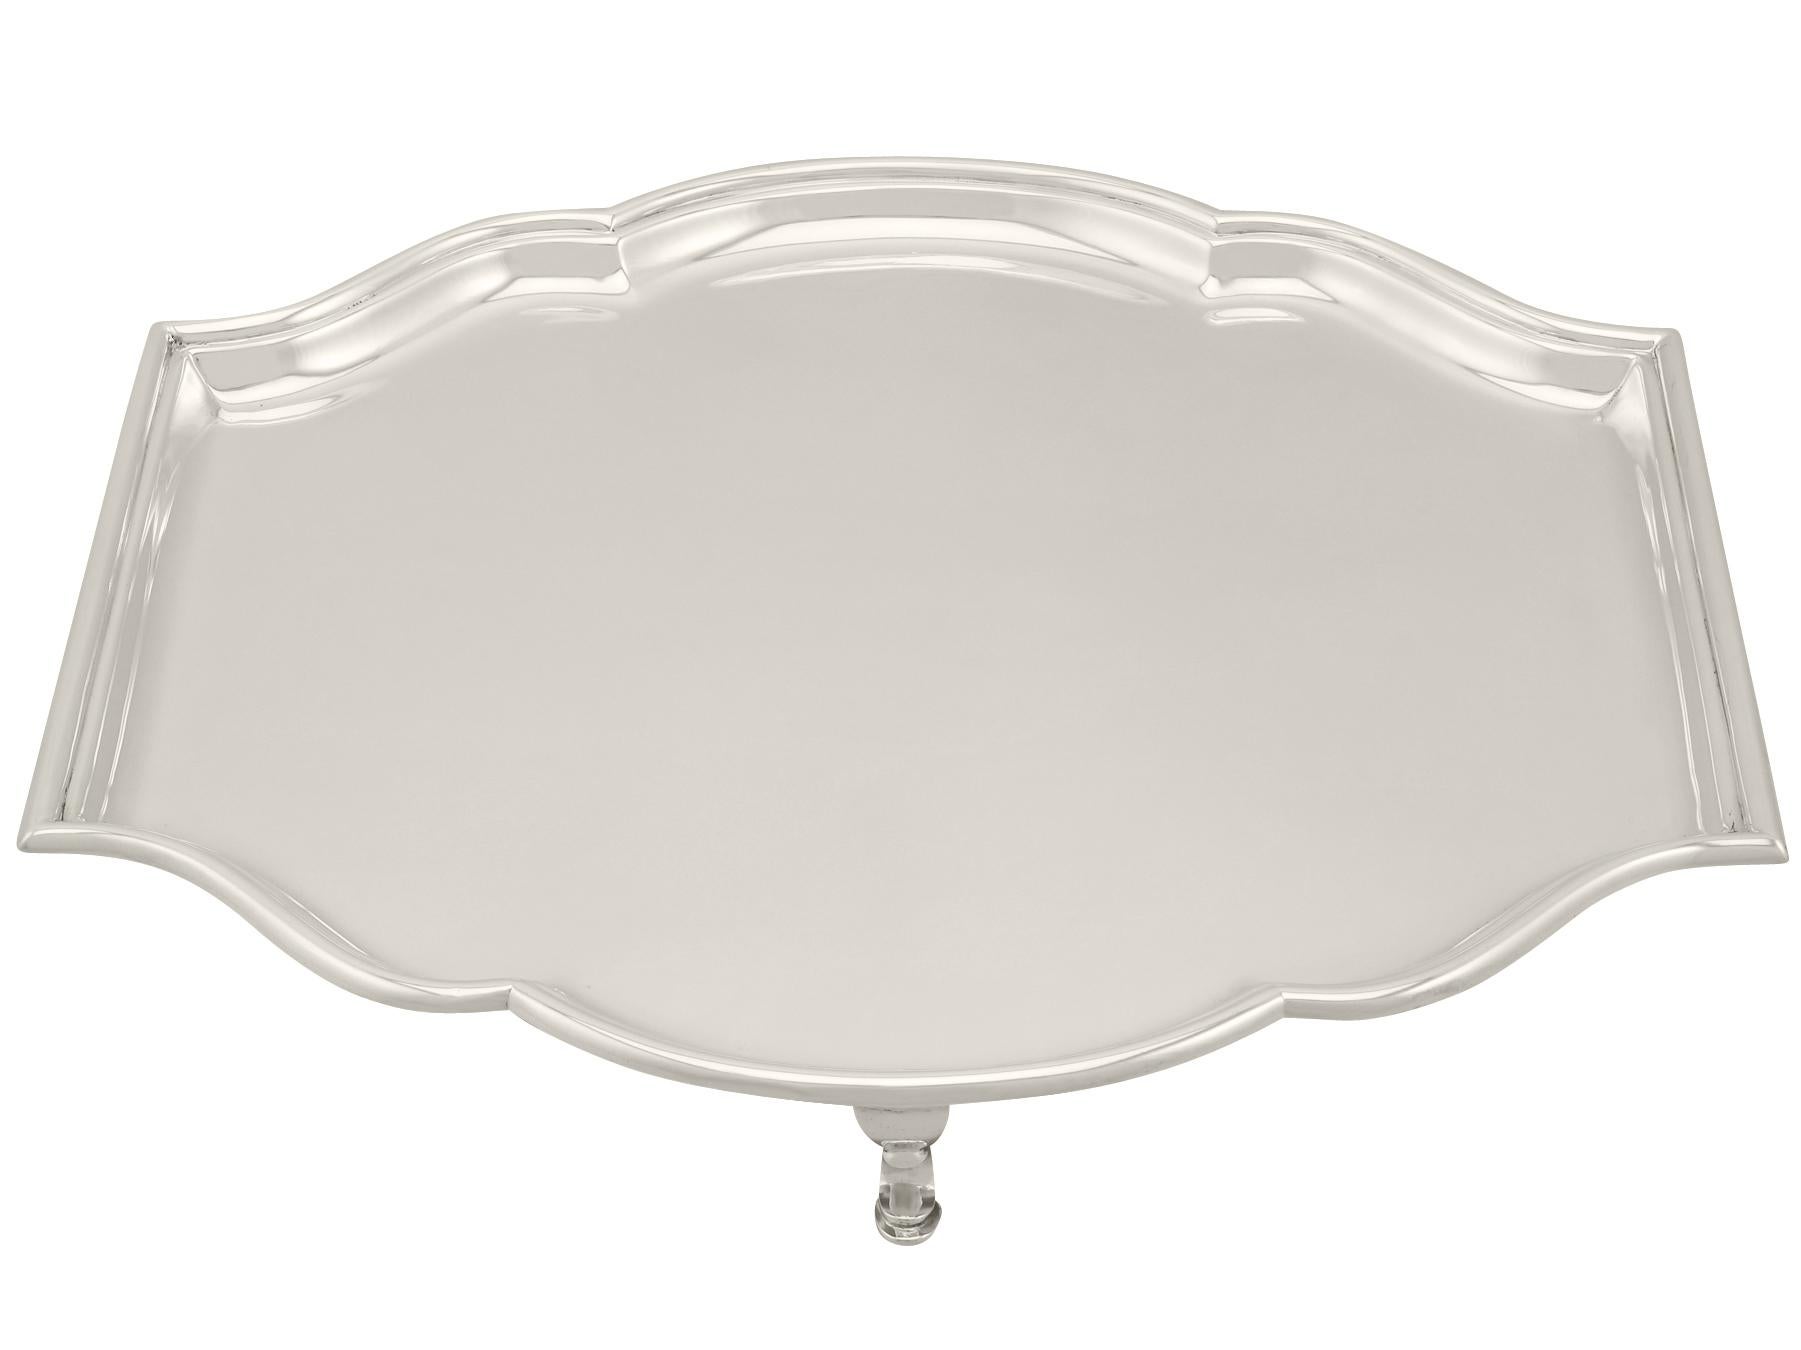 An exceptional, fine and impressive antique George V English sterling silver salver made in the Art Deco style, an addition to our silver dining collection.

This exceptional antique George V English sterling silver salver has a circular shaped